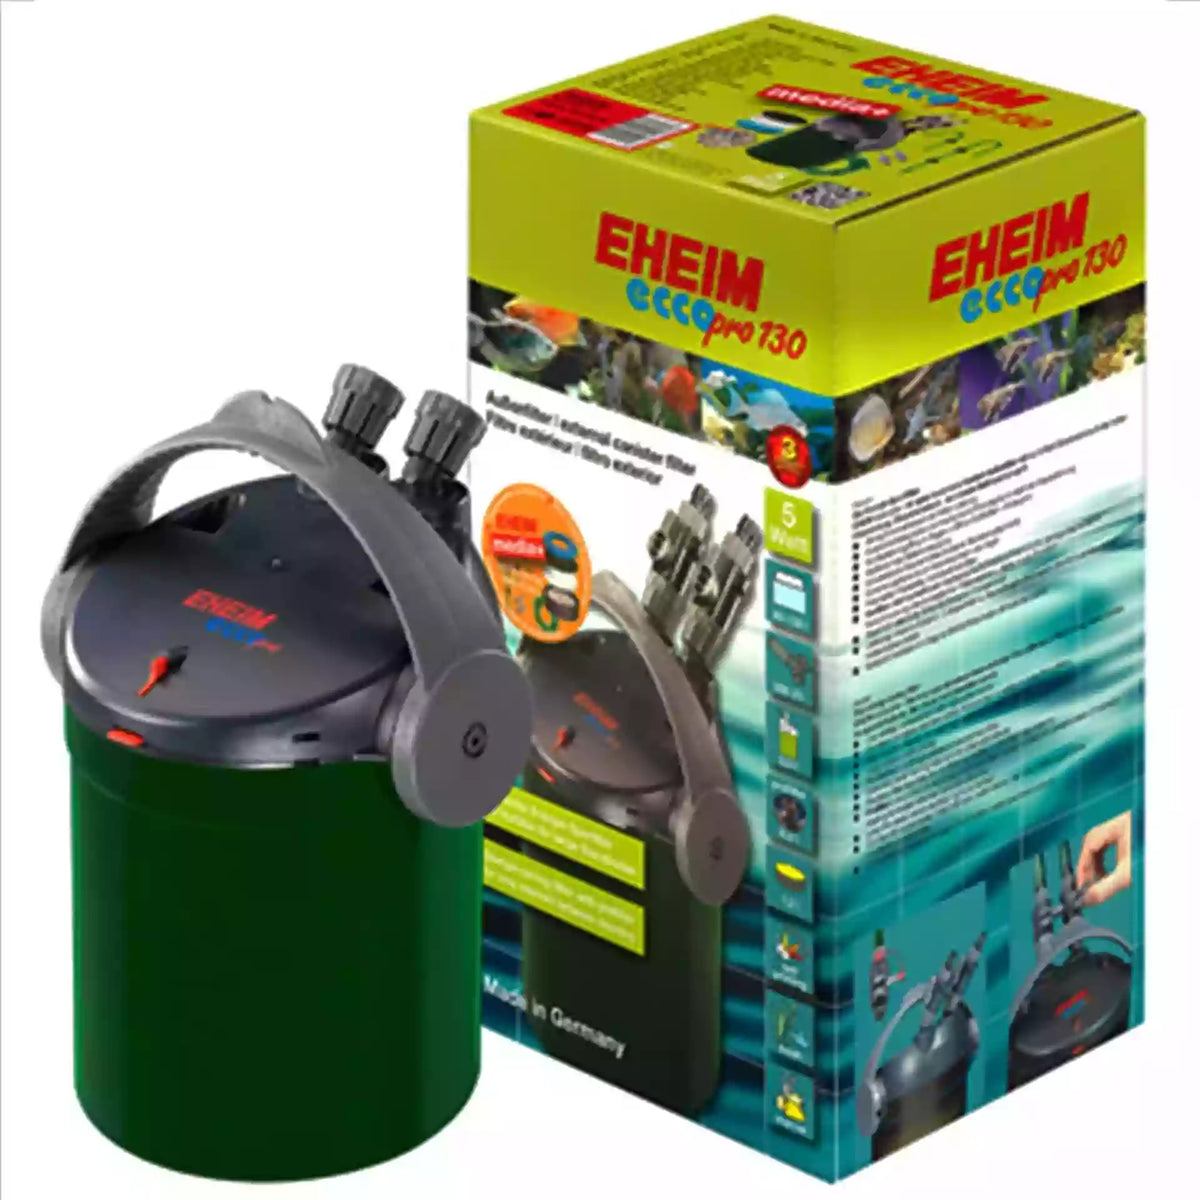 Eheim Ecco Pro 130 Canister Filter